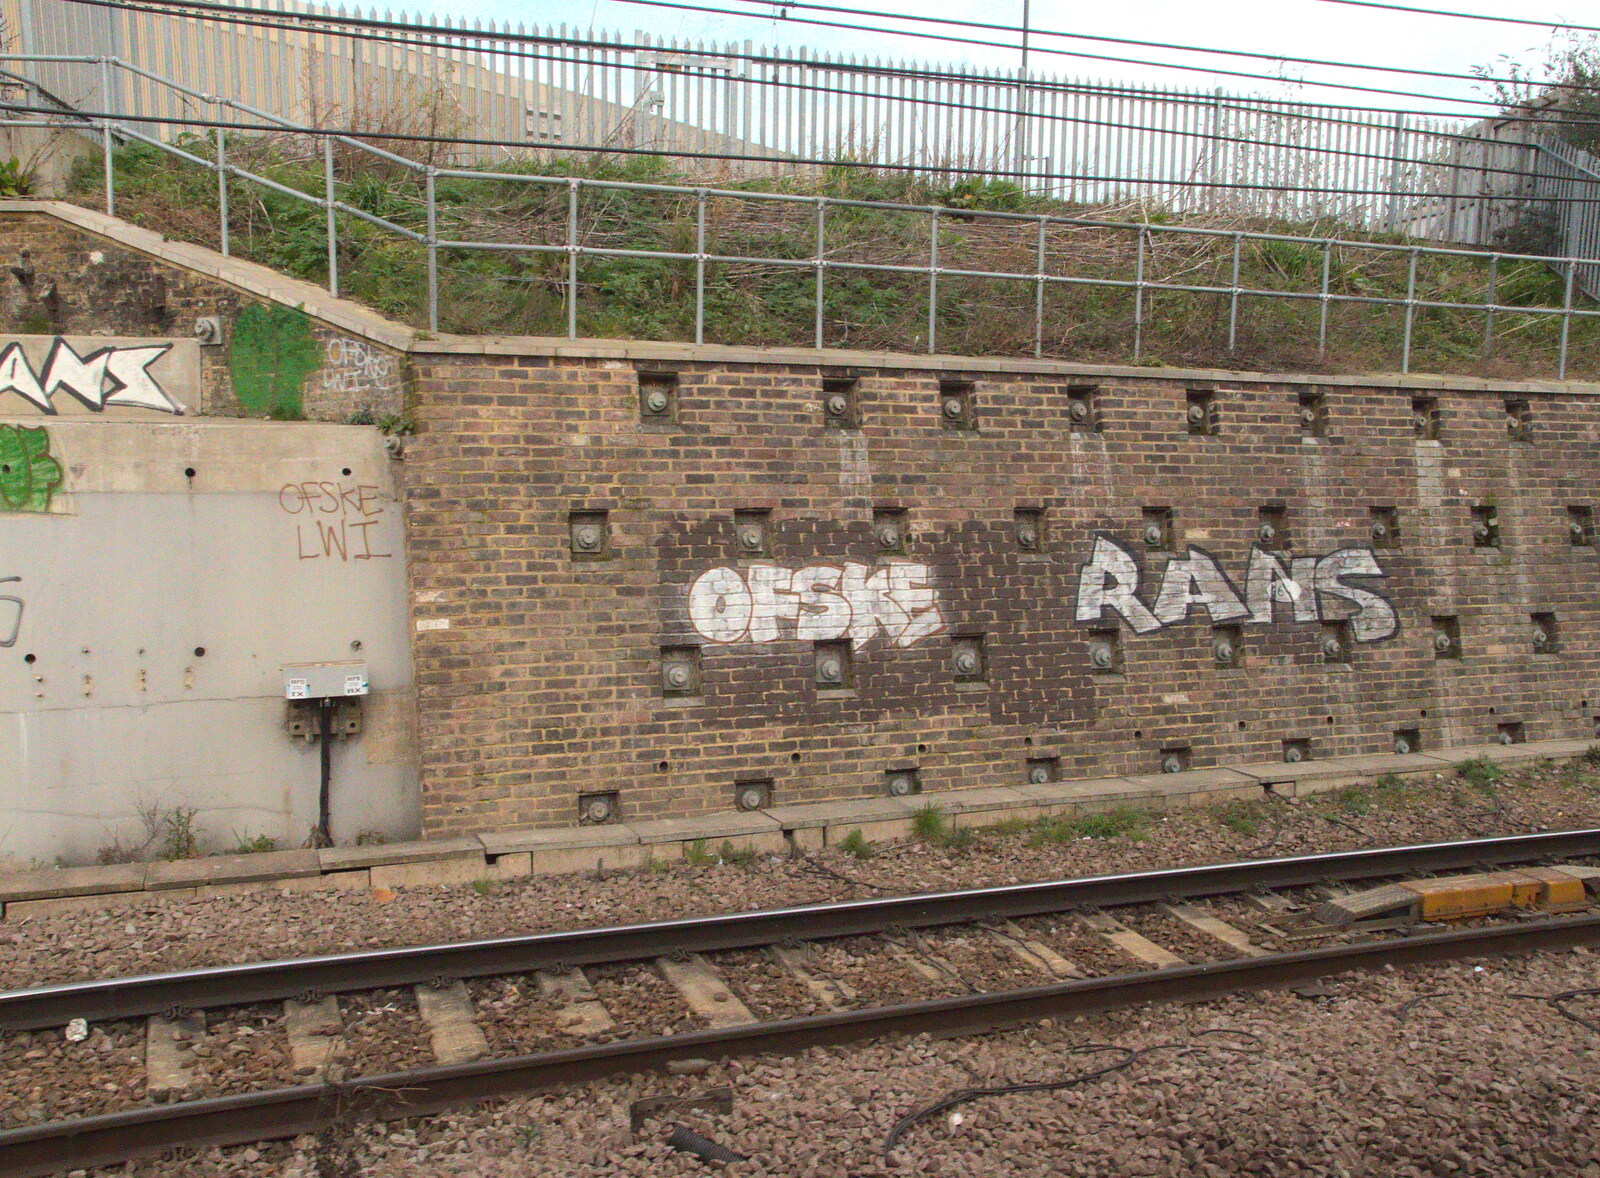 Ofske and Rans tags, on a wall like a battleship from The Mobile Train Office, Diss to London - 5th March 2015